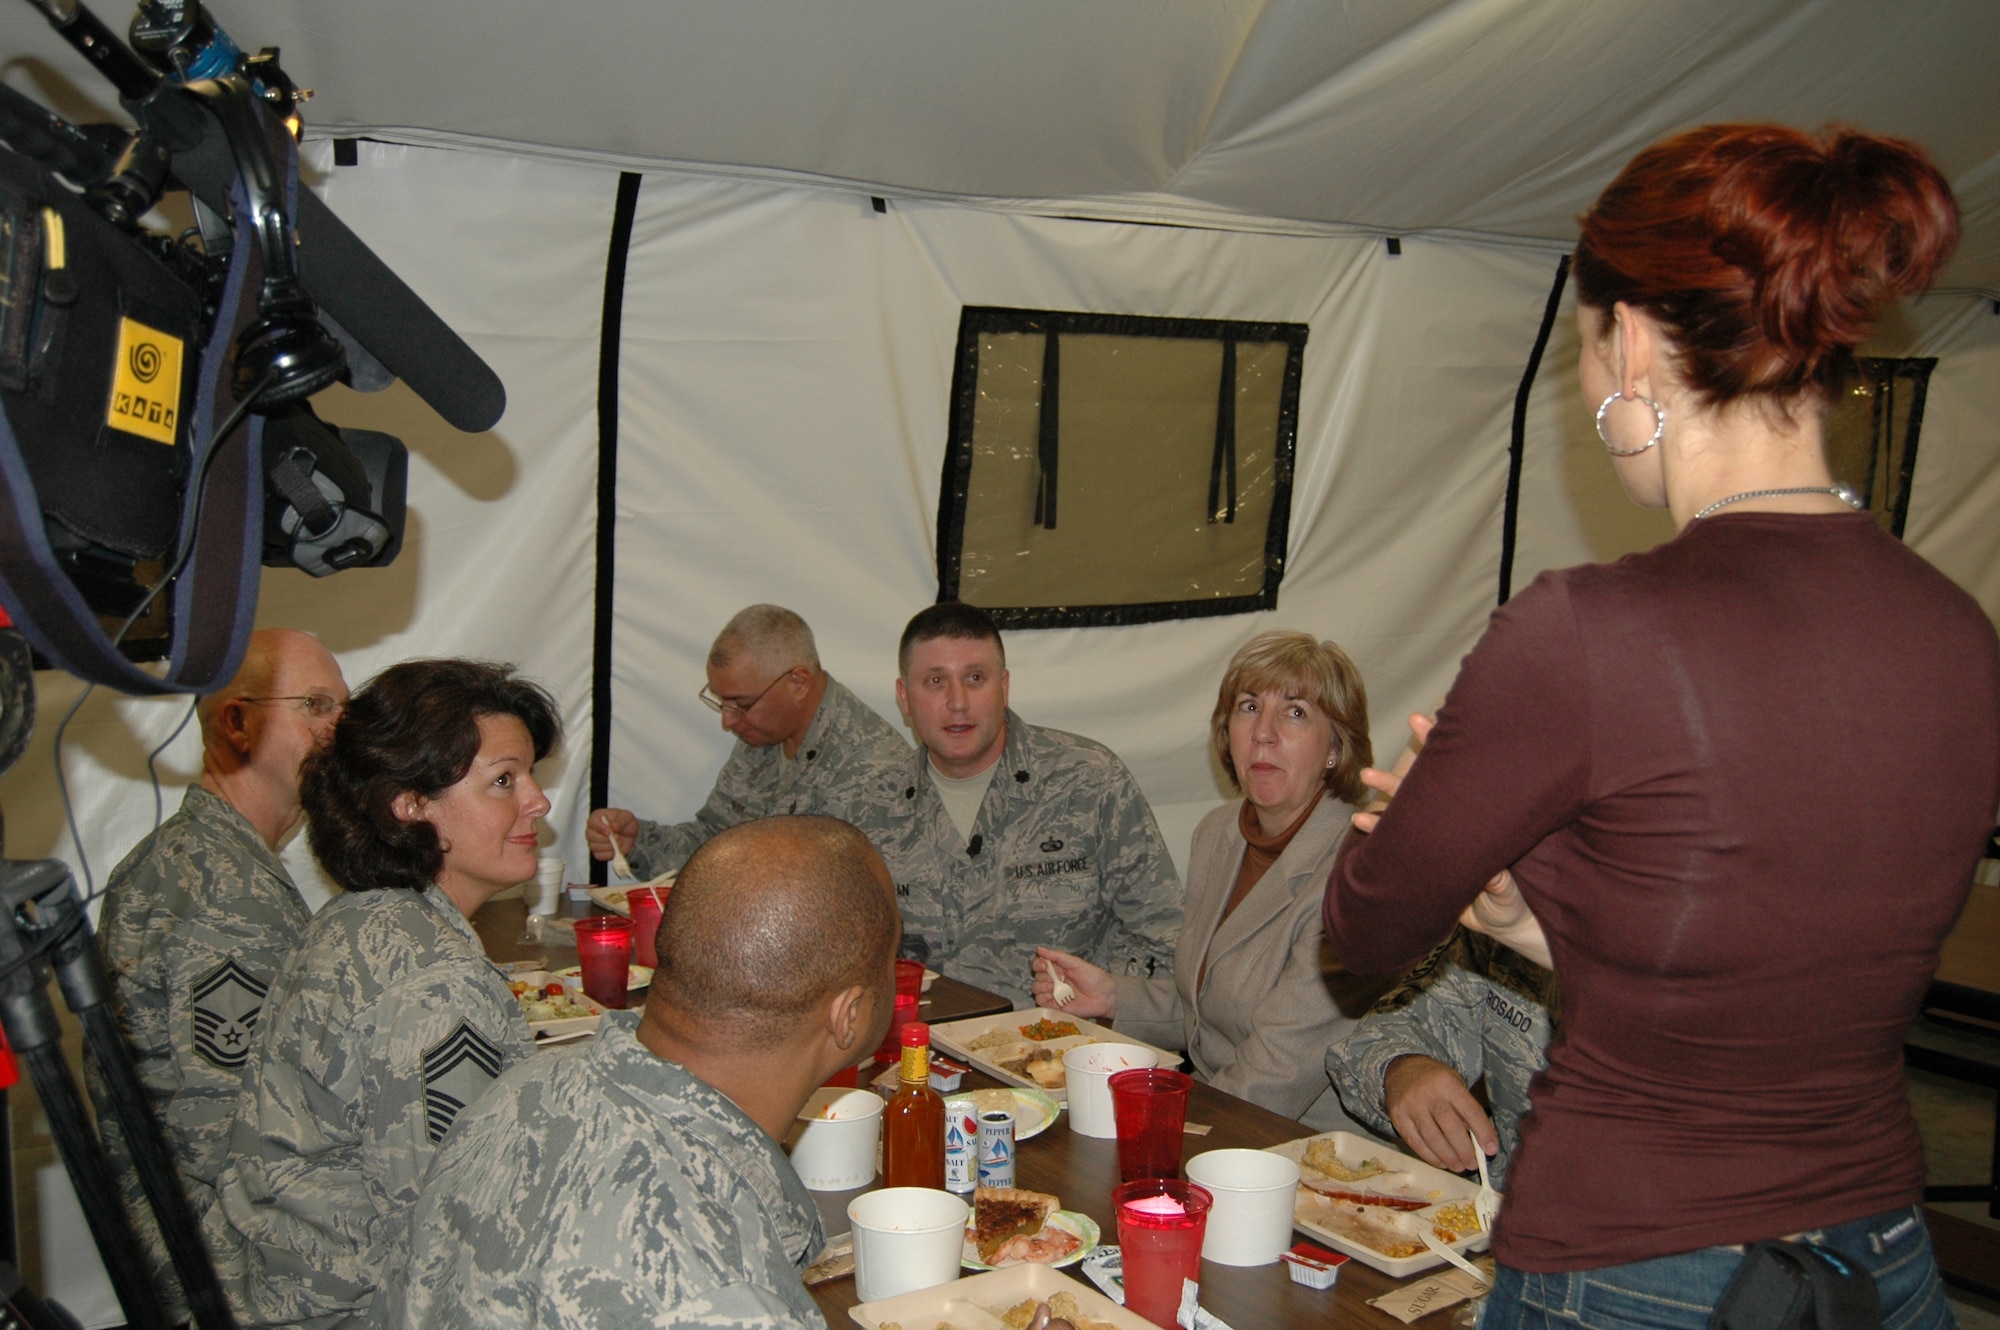 CBS46 TV reporter Dagmar Midcap interviews Dobbins ARB personnel about their deployment experience and the Christmas meal served at the combat dining facility.  (U.S. Air Force photo/Master Sgt. Stan Coleman)